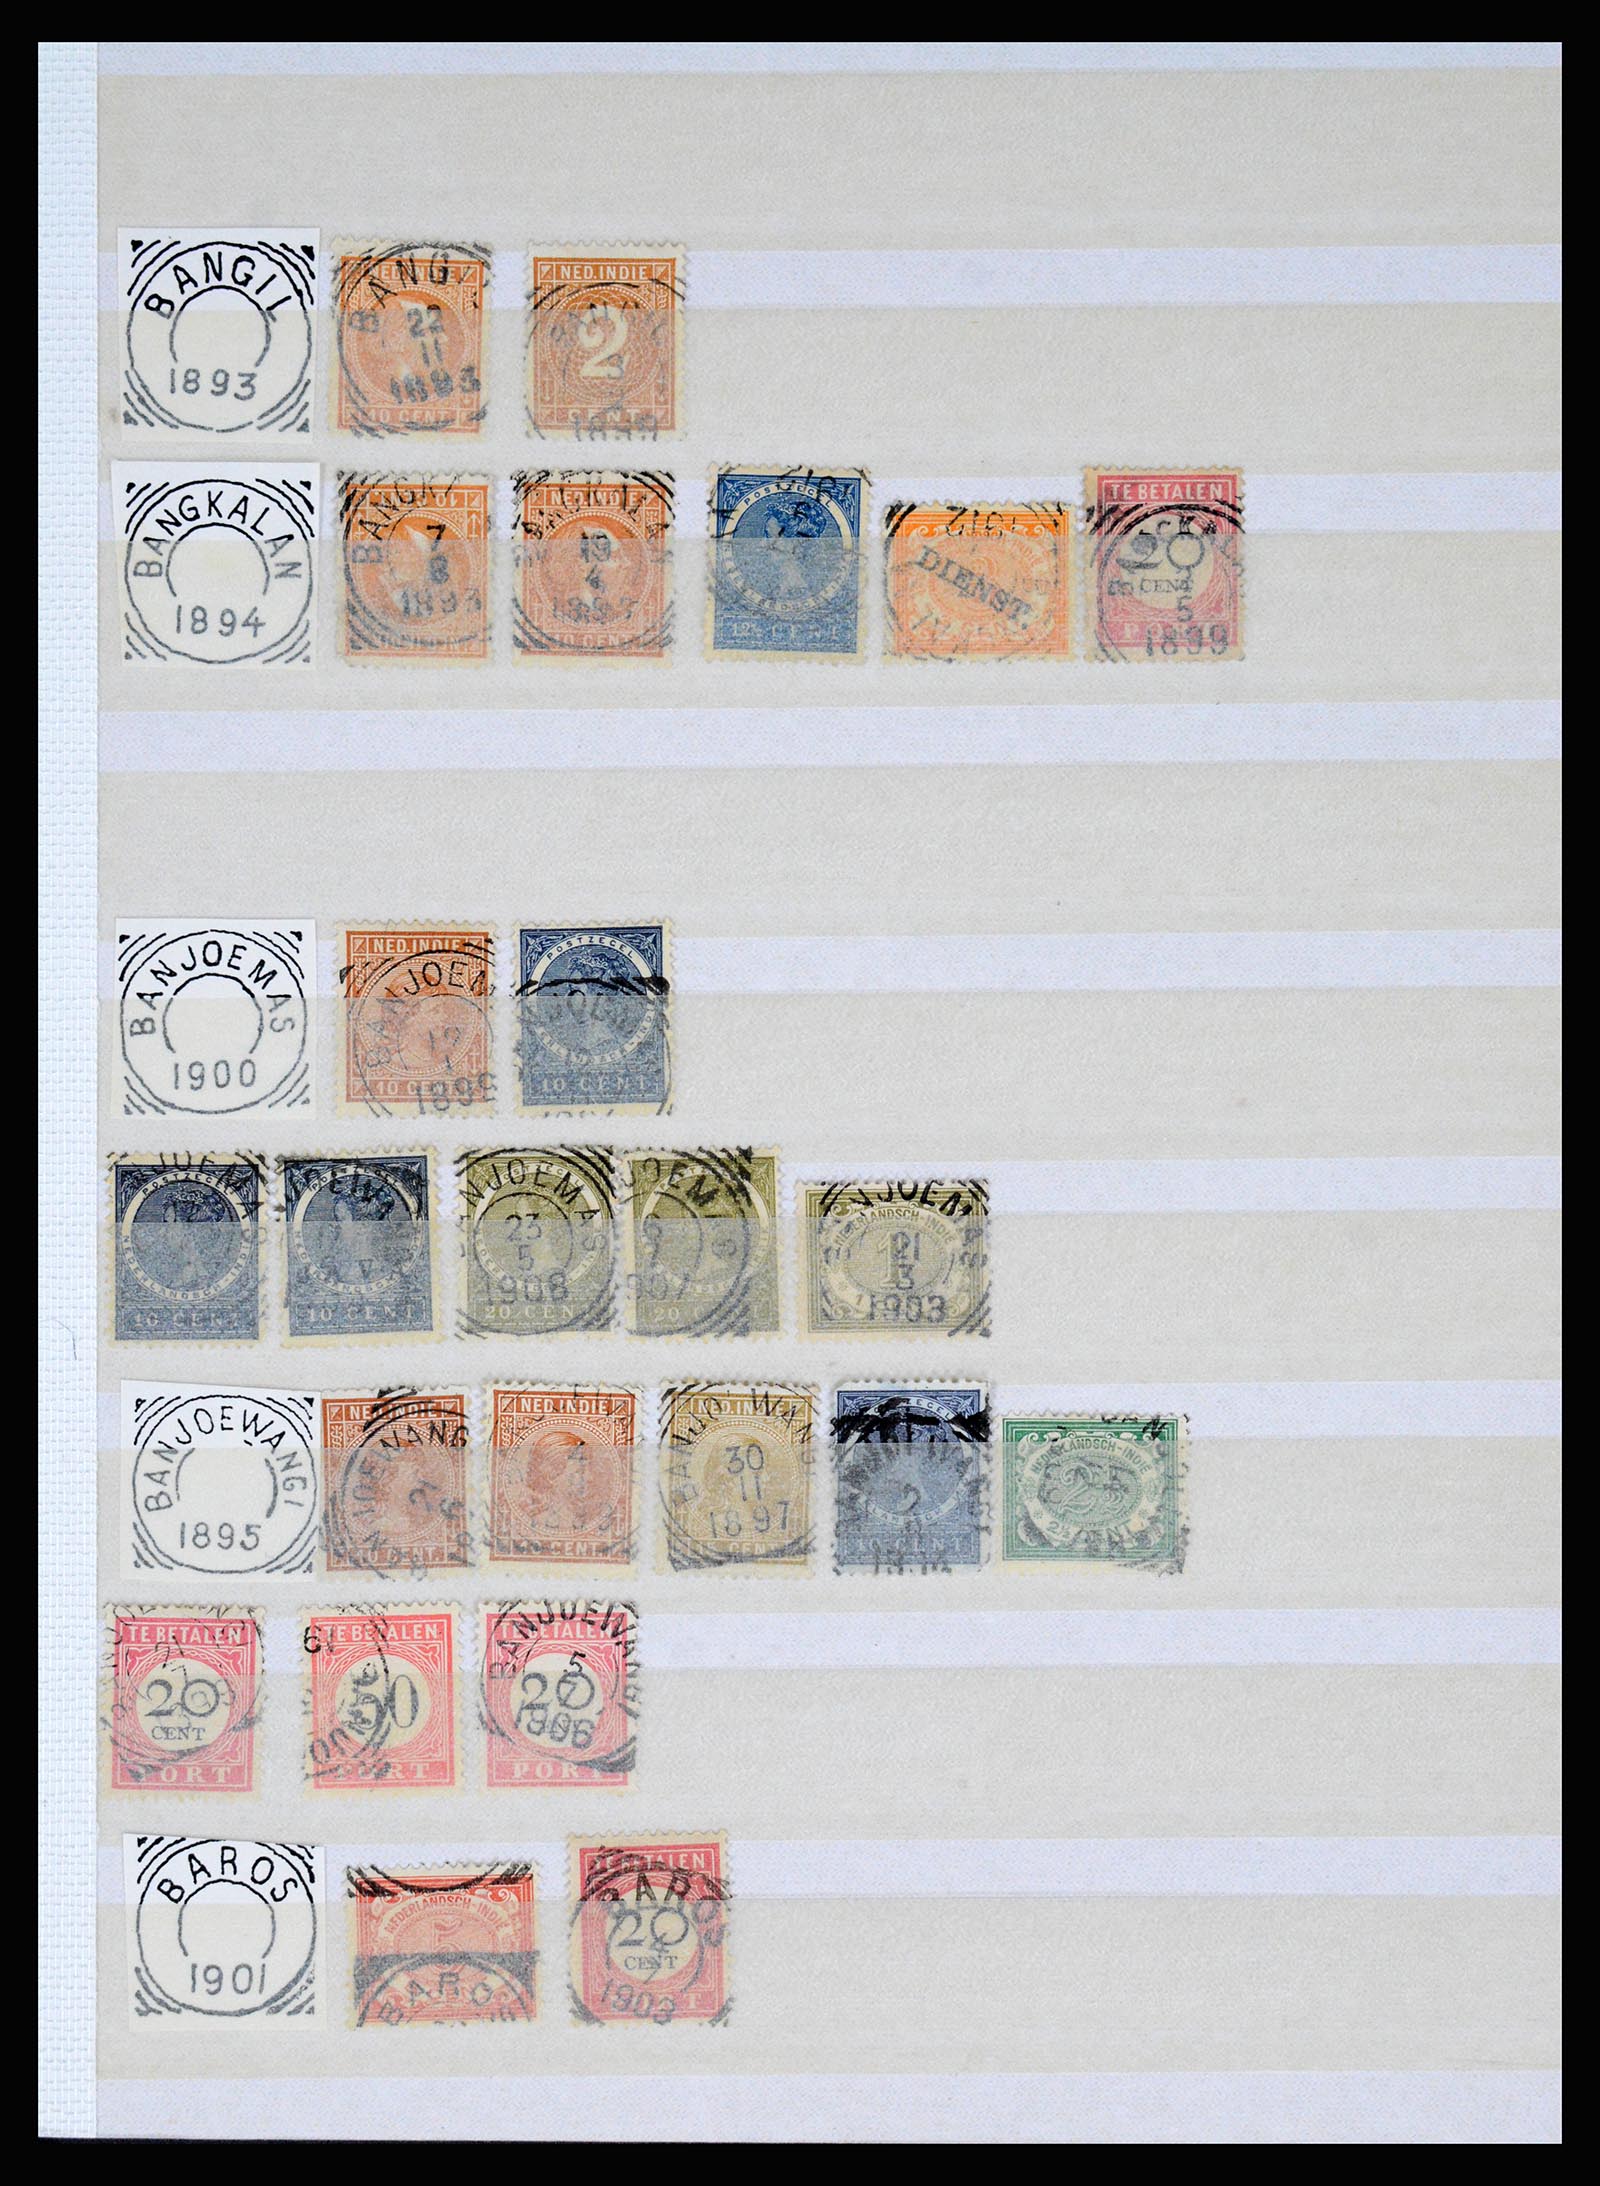 36839 062 - Stamp collection 36839 Dutch east Indies square cancels.